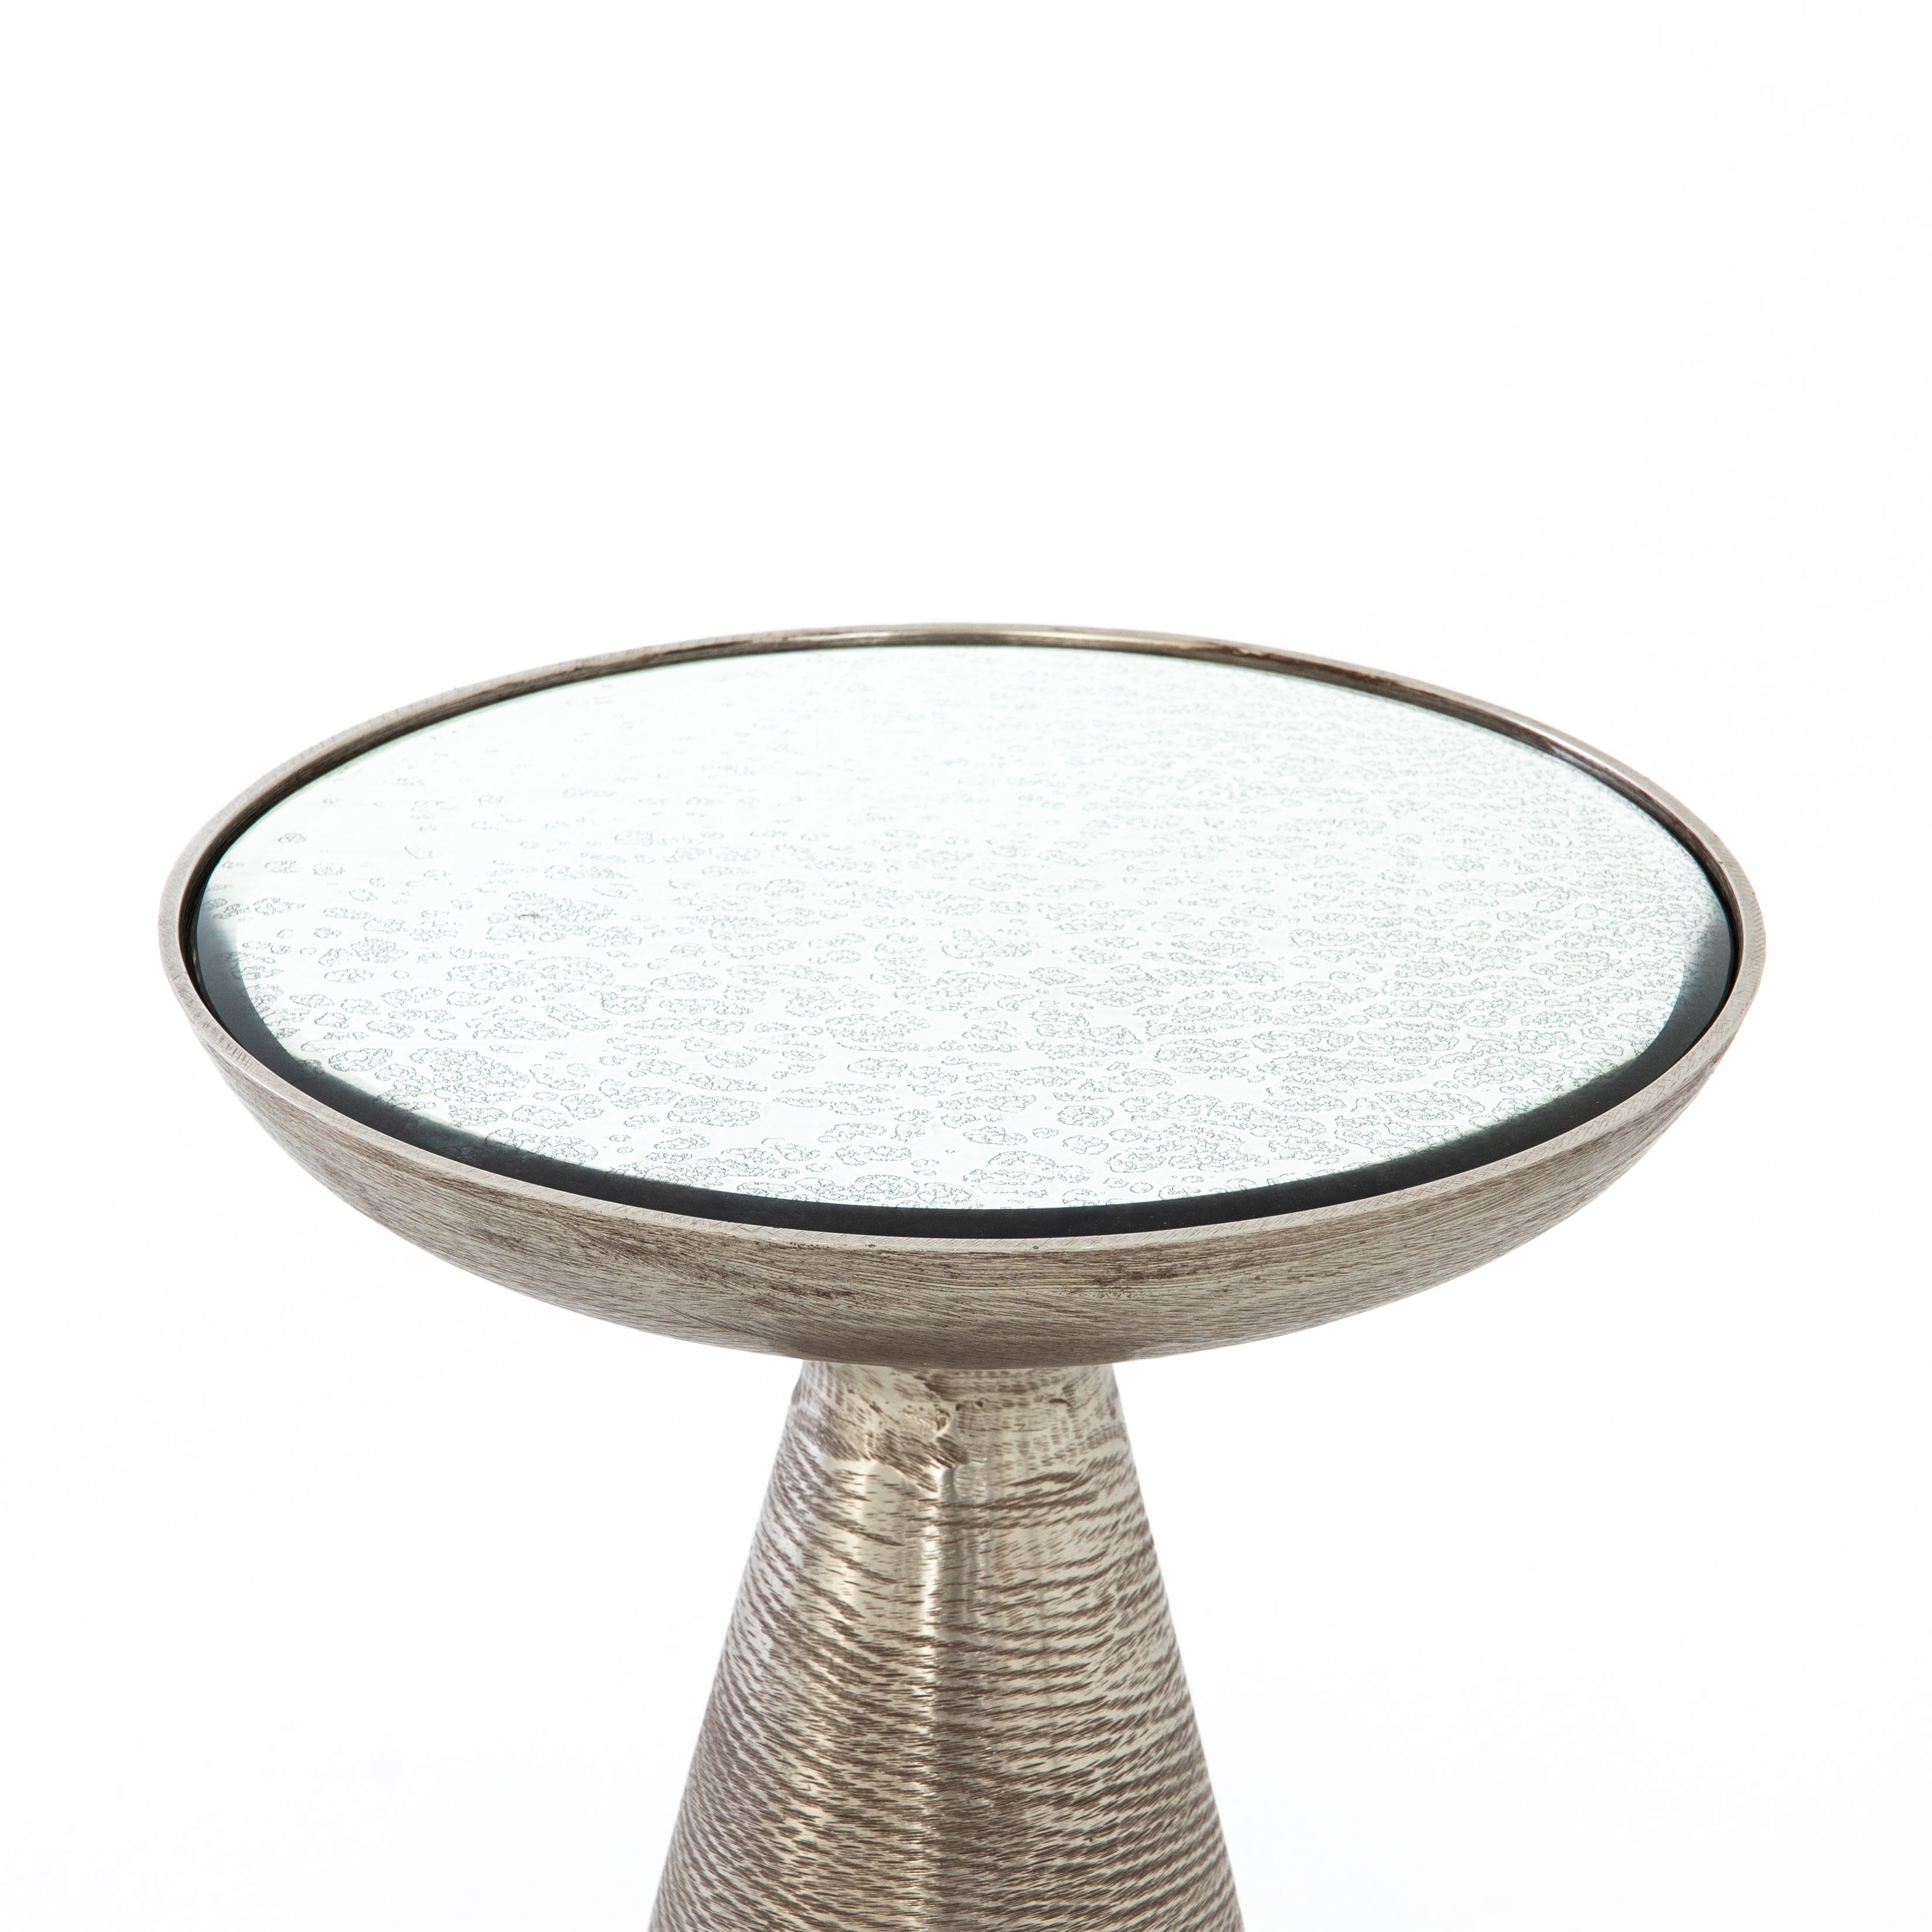 Brushed Nickel with Ash Glass | Marlow Mod Pedestal Table | Valley Ridge Furniture